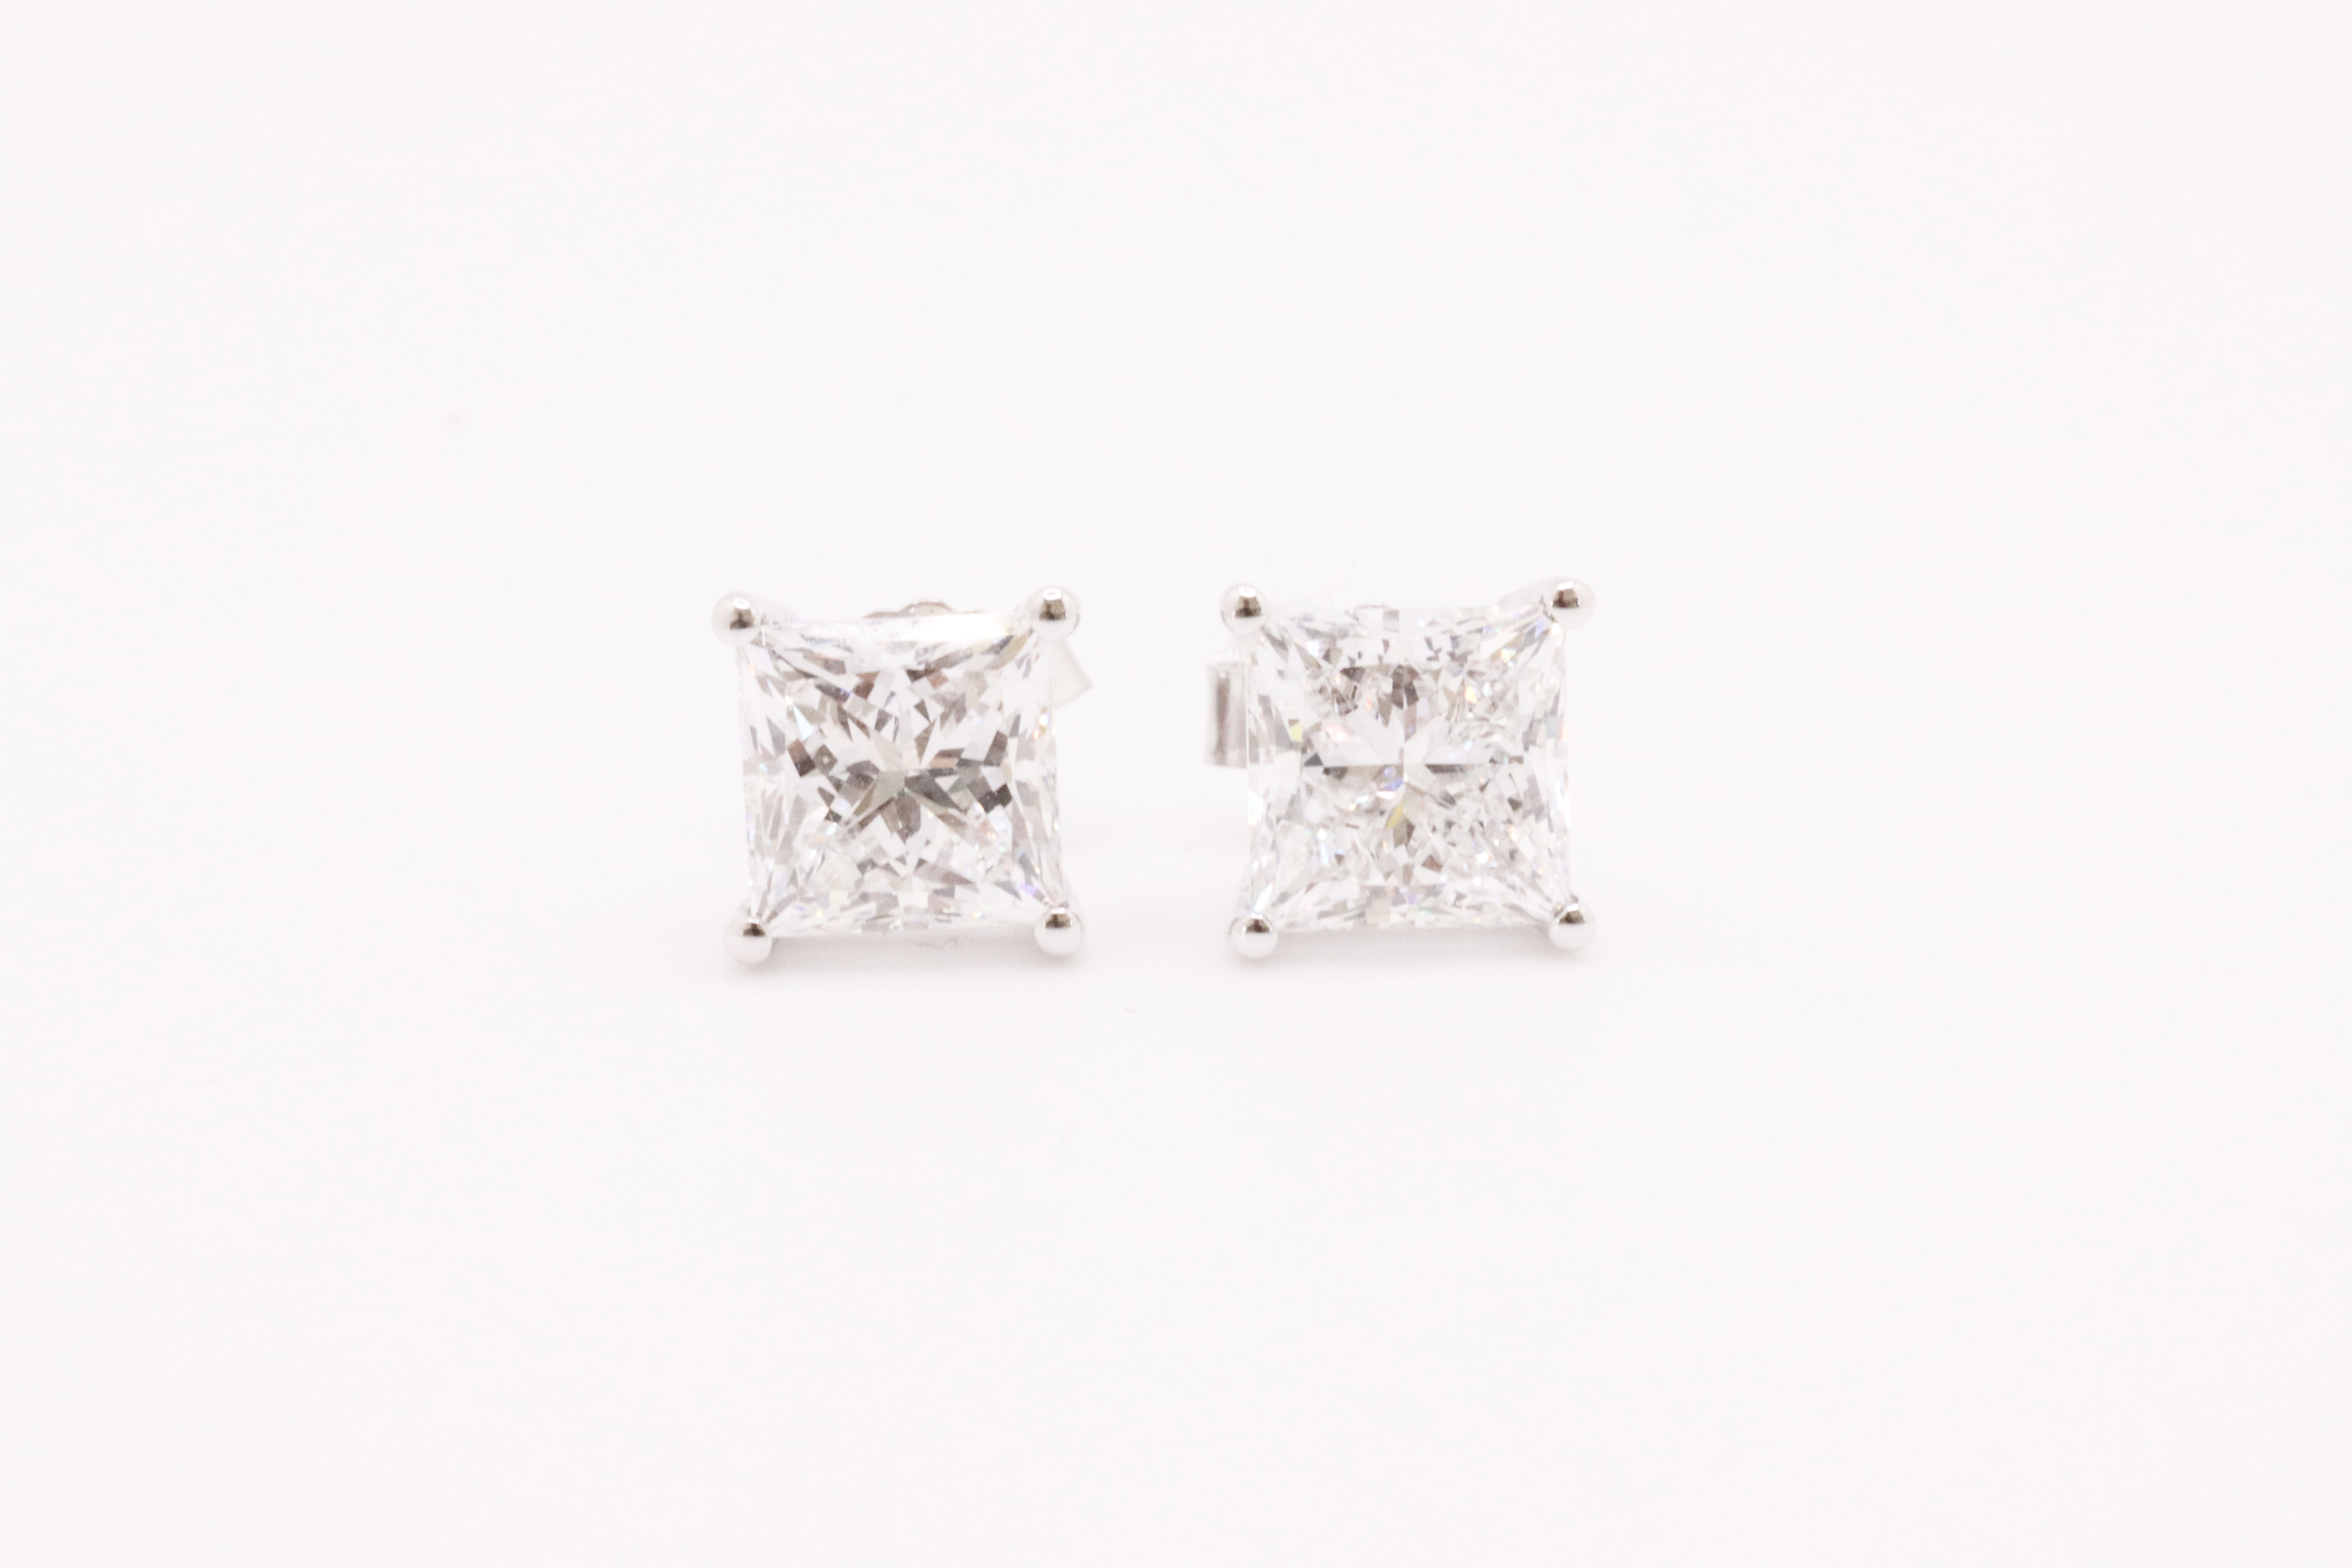 Princess Cut 5.00 Carat Diamond Earrings Set in 18kt White Gold - F Colour VS Clarity - Image 3 of 5